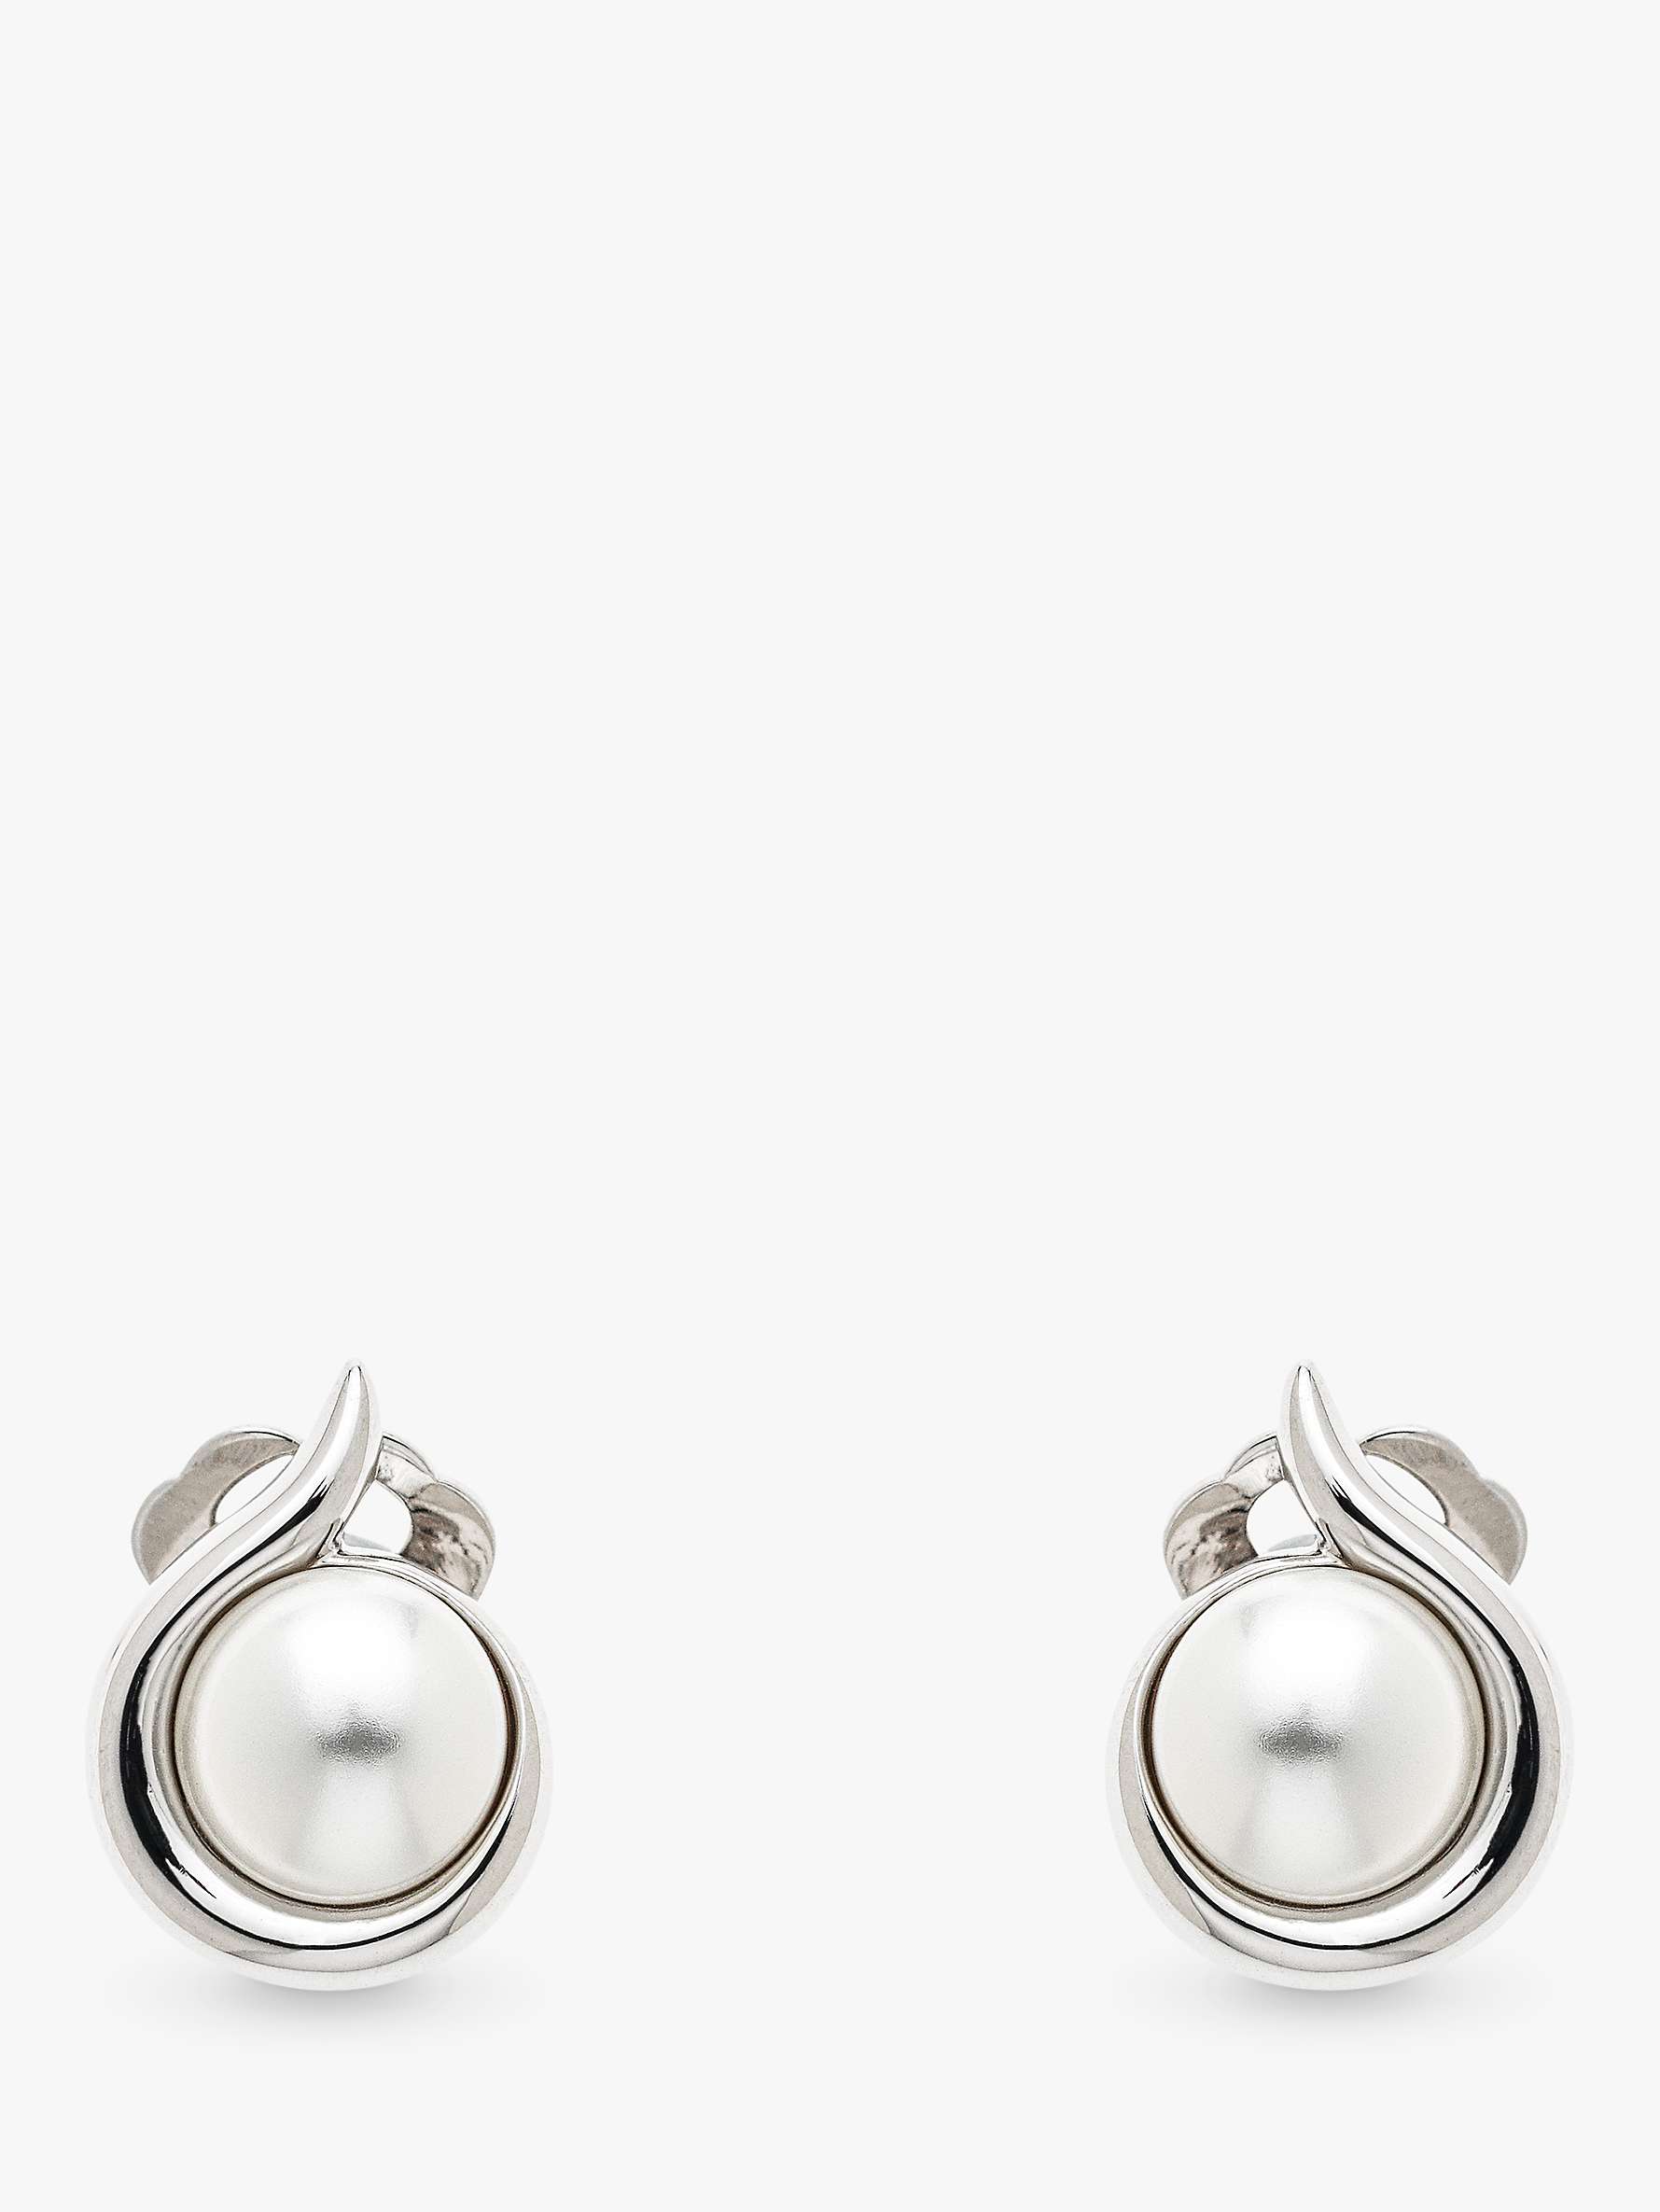 Buy Emma Holland Faux Pearl Round Clip-On Stud Earrings Online at johnlewis.com